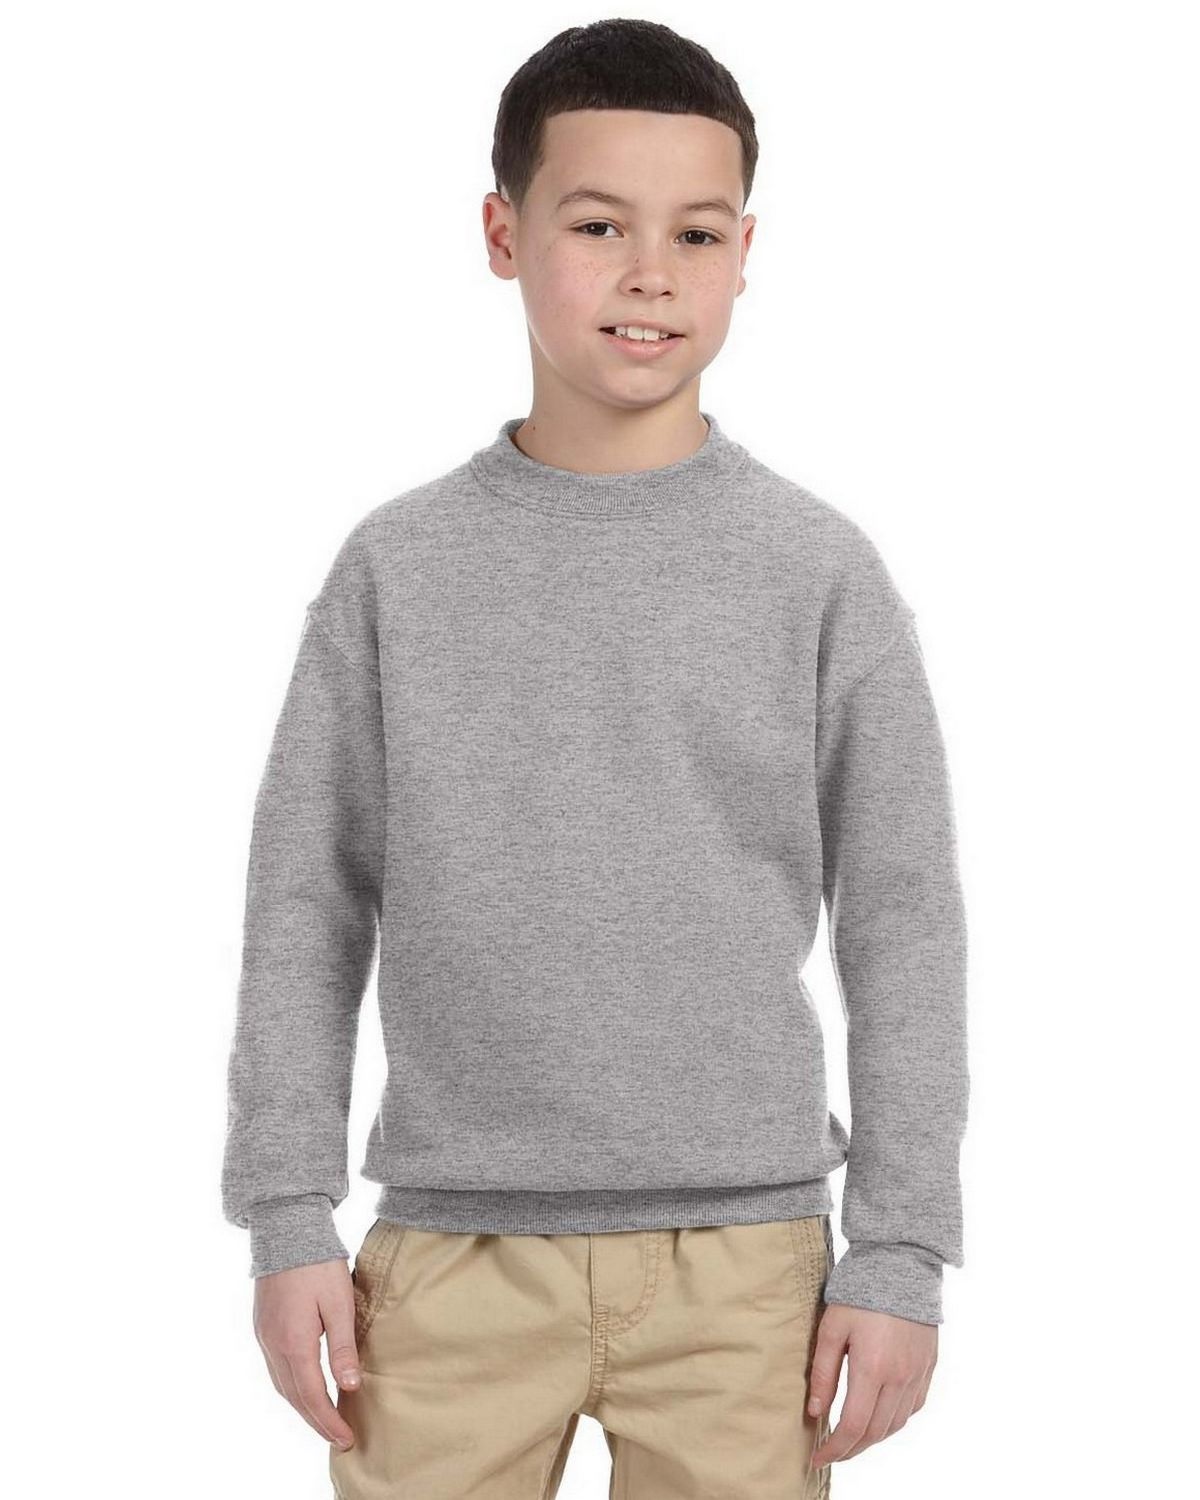 Size Chart For Jerzees 4662b Youth 95 Oz Super Sweats 5050 Crew